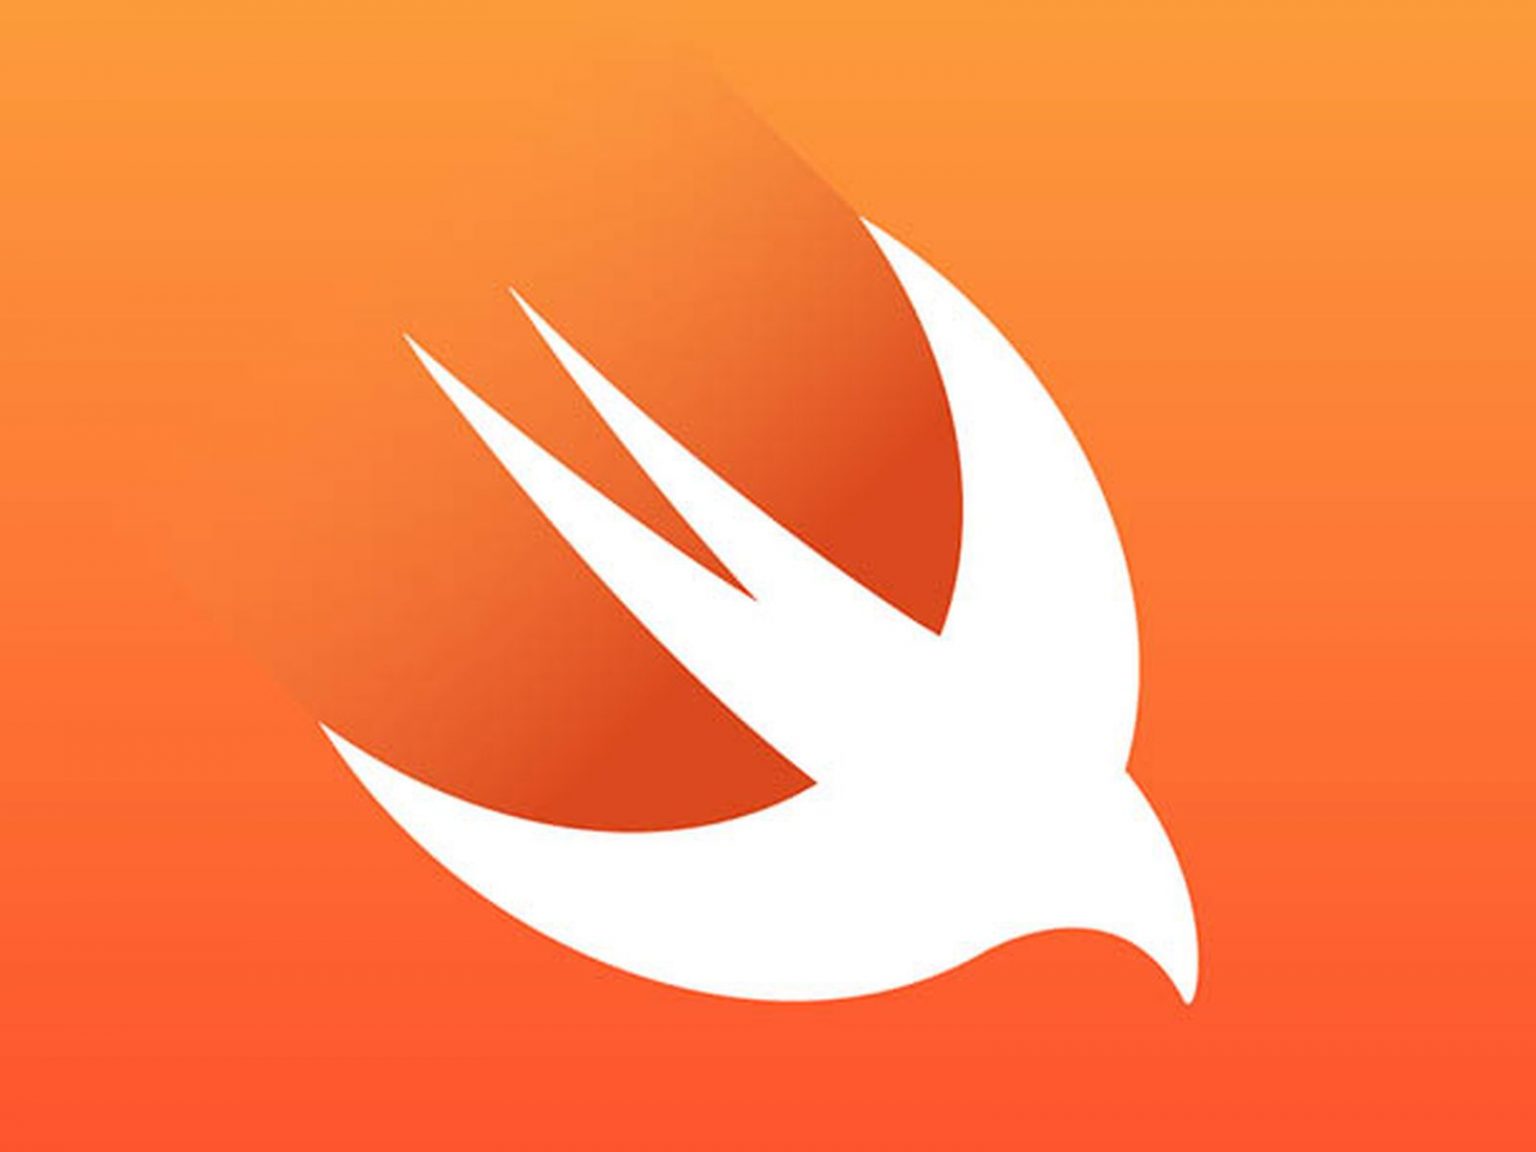 Apple releases Swift Playgrounds 4, which lets users develop apps on their iPads and upload finished apps to the App Store (Aisha Malik/TechCrunch)